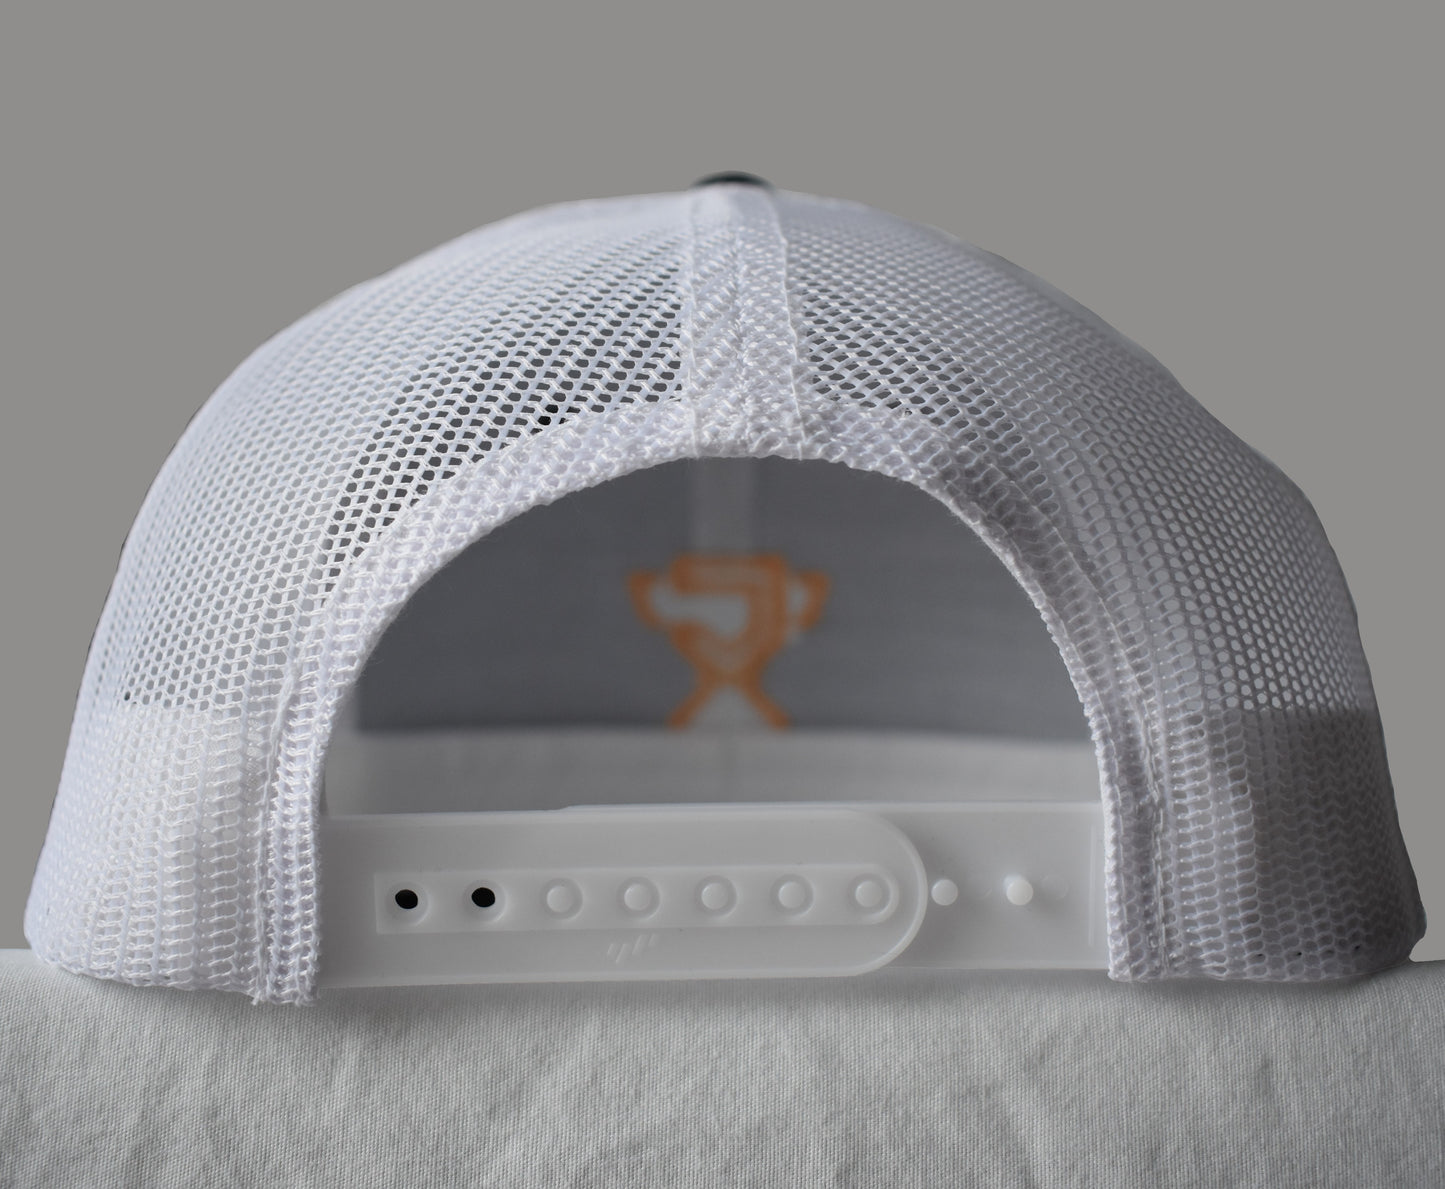 The back of the Champletes trucker hat.